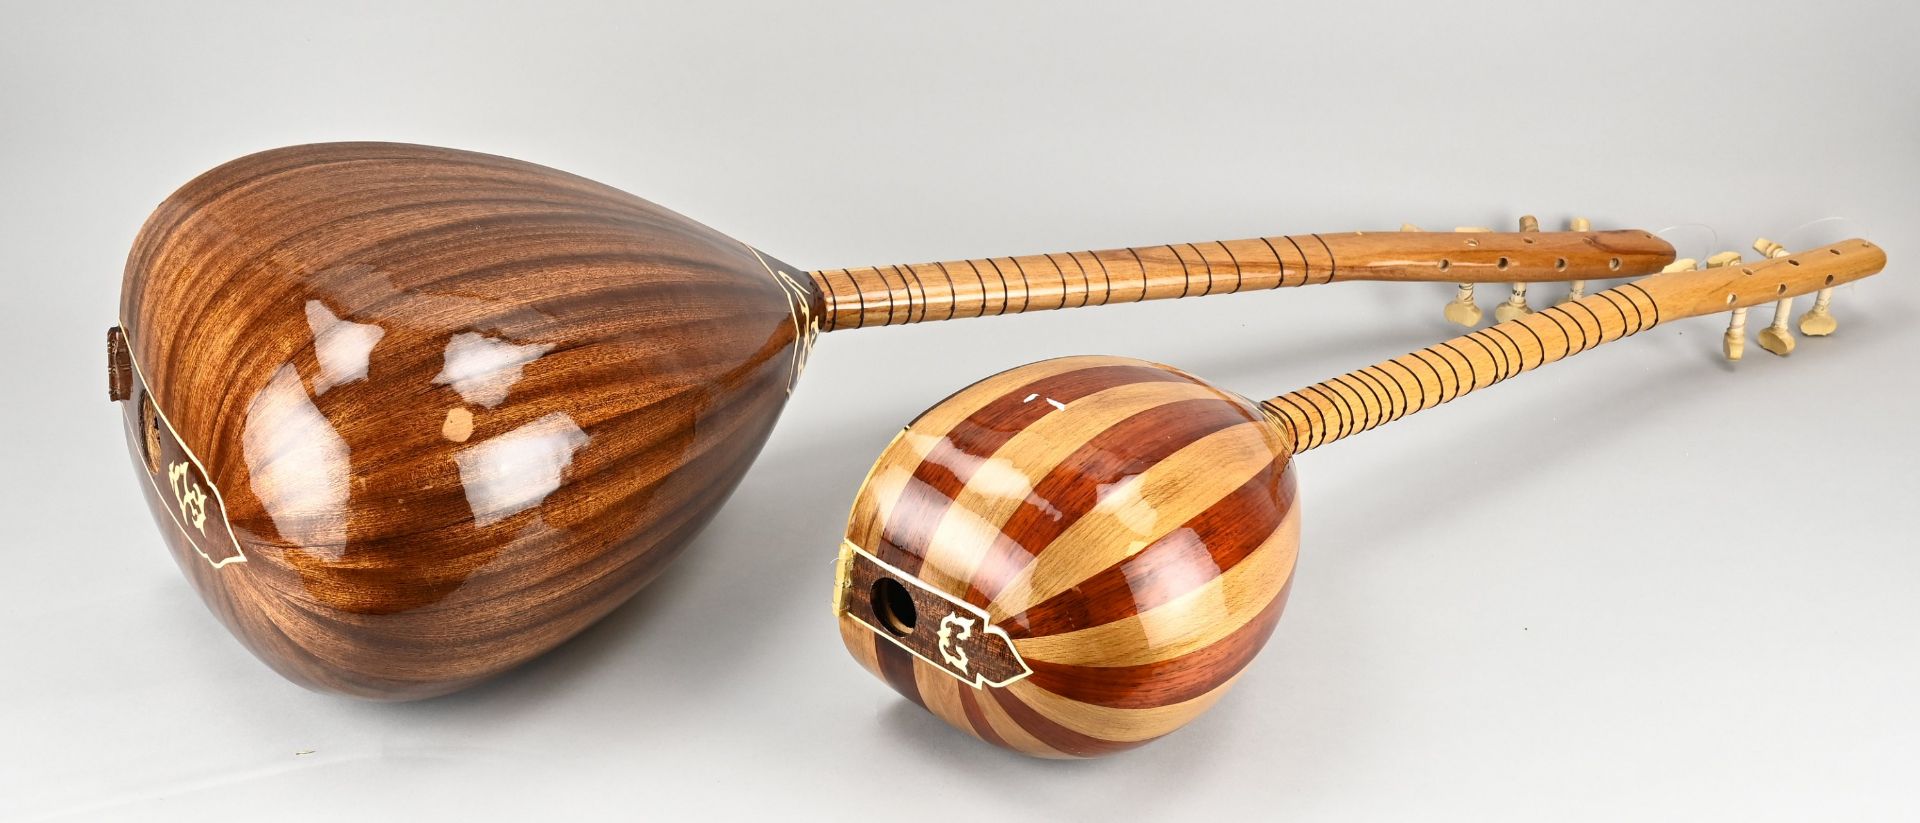 2x Persian string instrument - Image 2 of 2